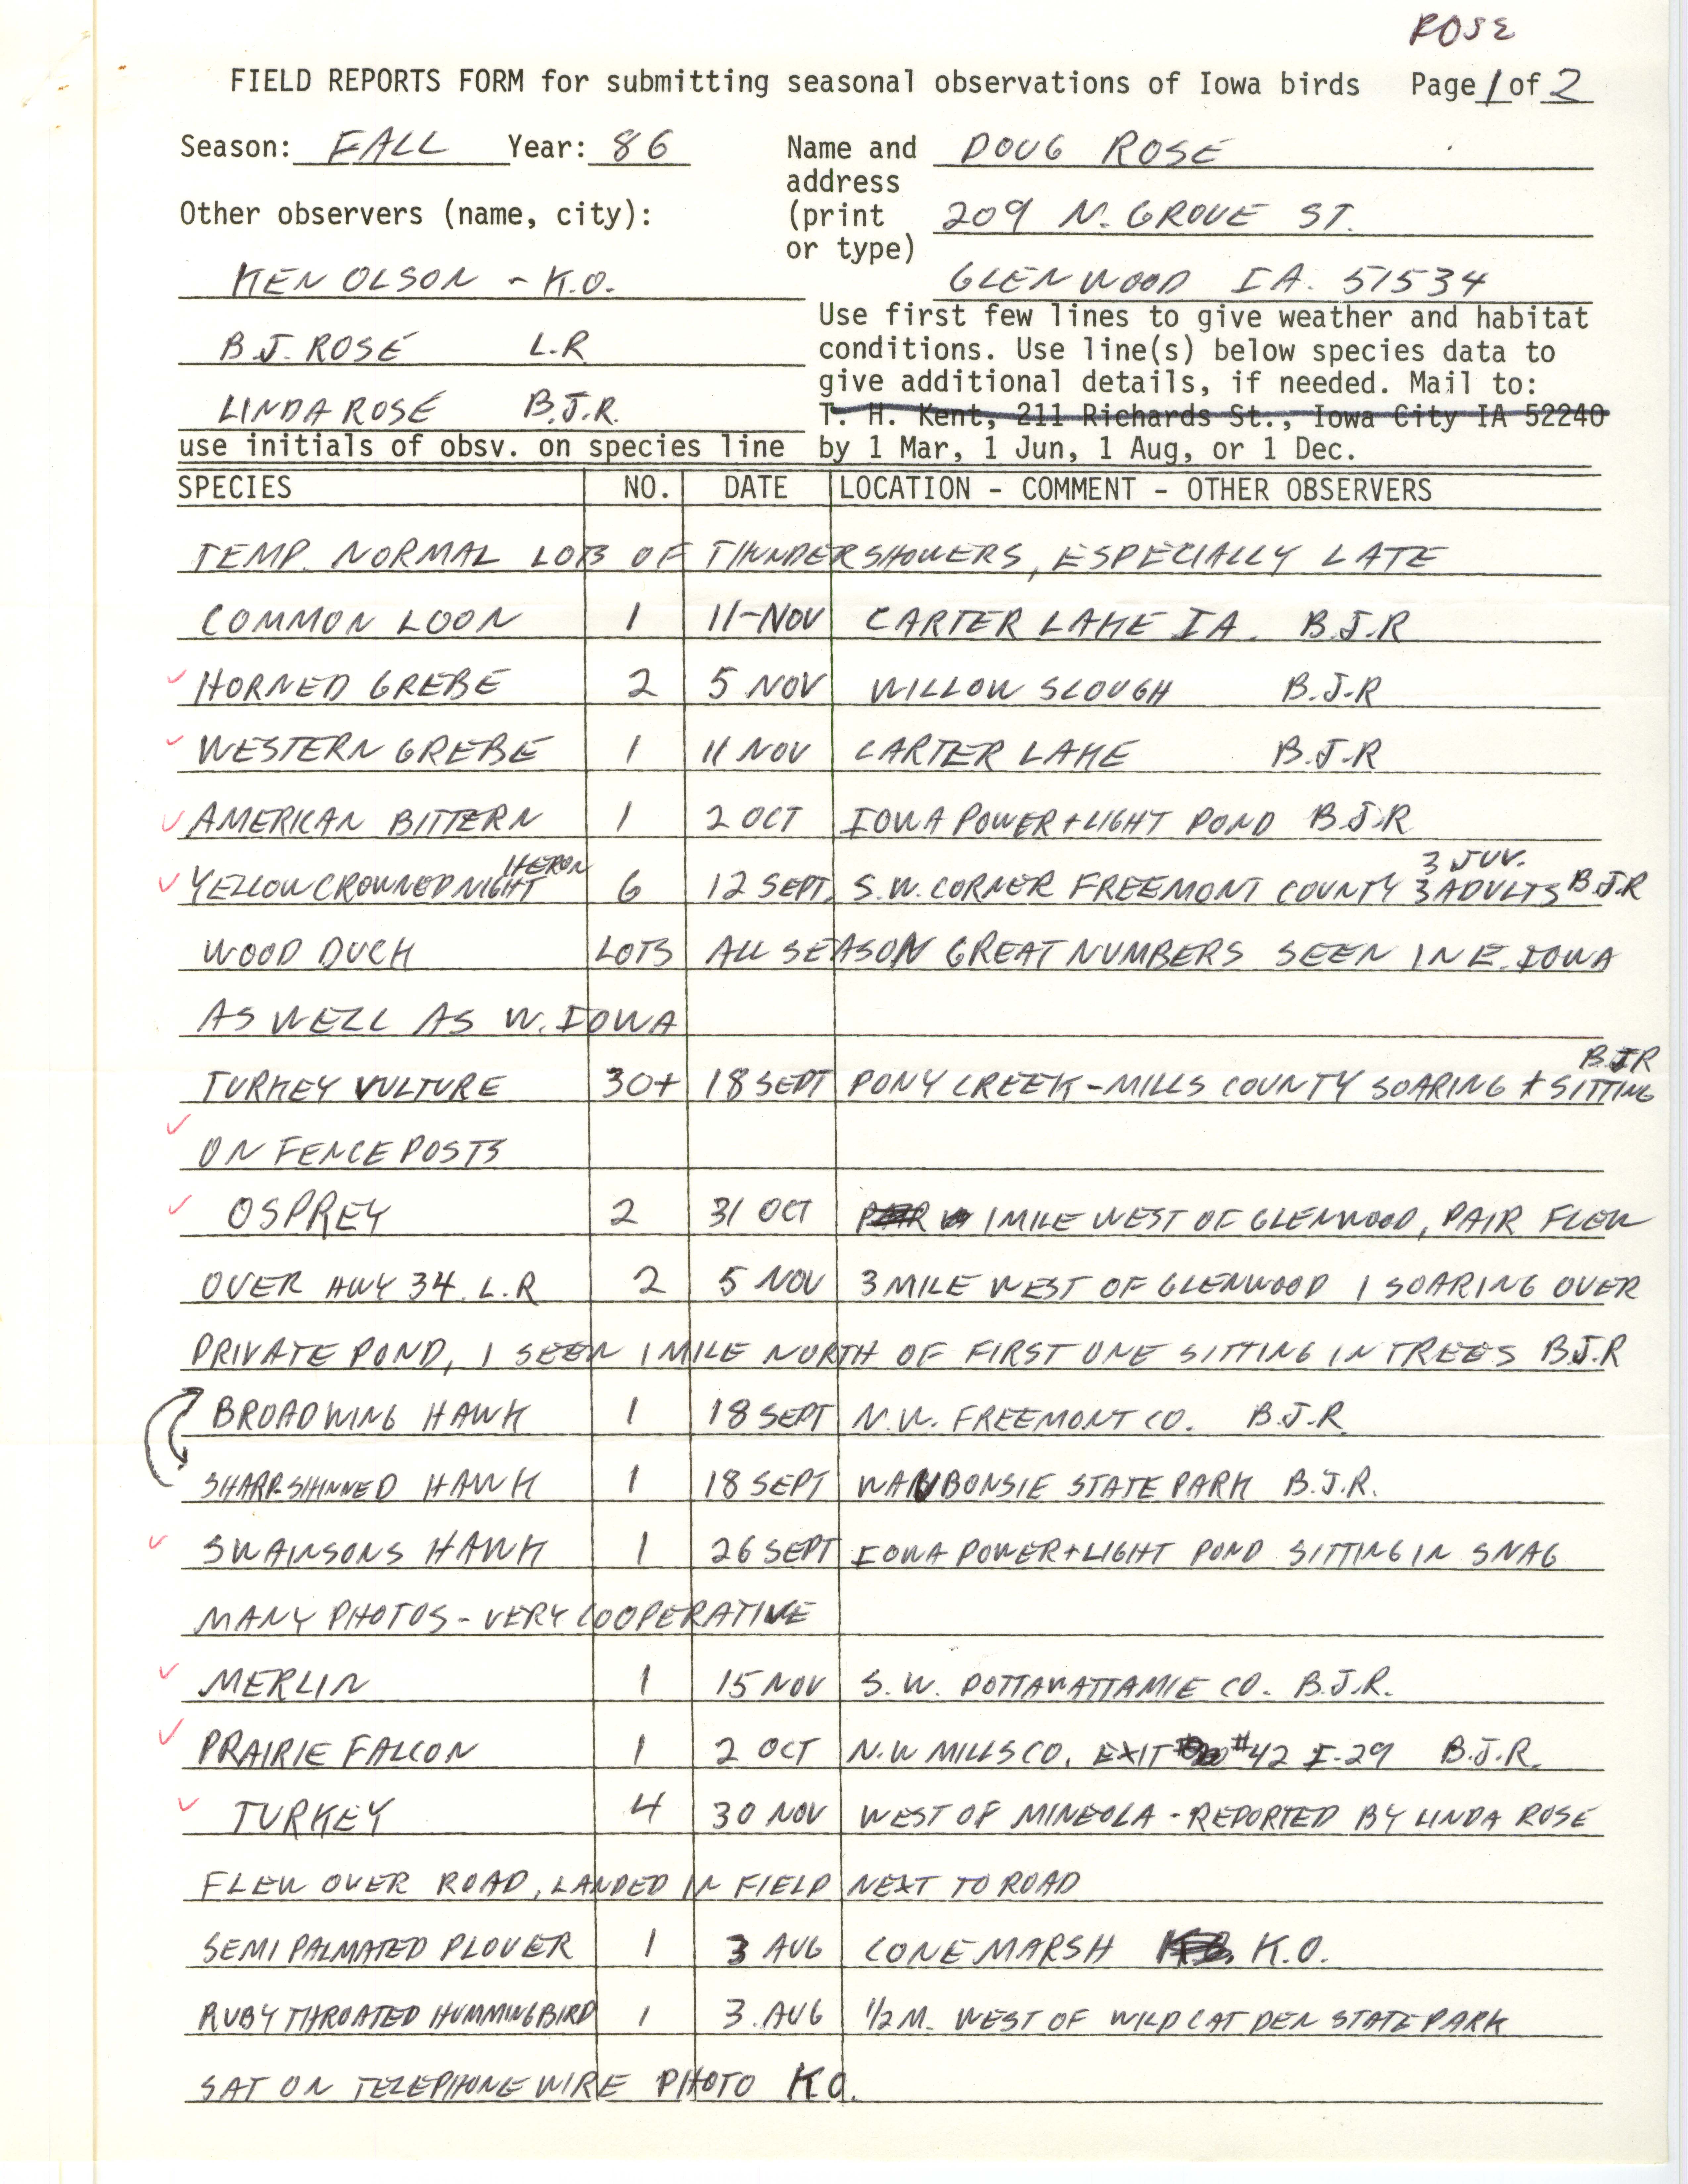 Field reports form for submitting seasonal observations of Iowa birds, Douglas Rose, fall 1986